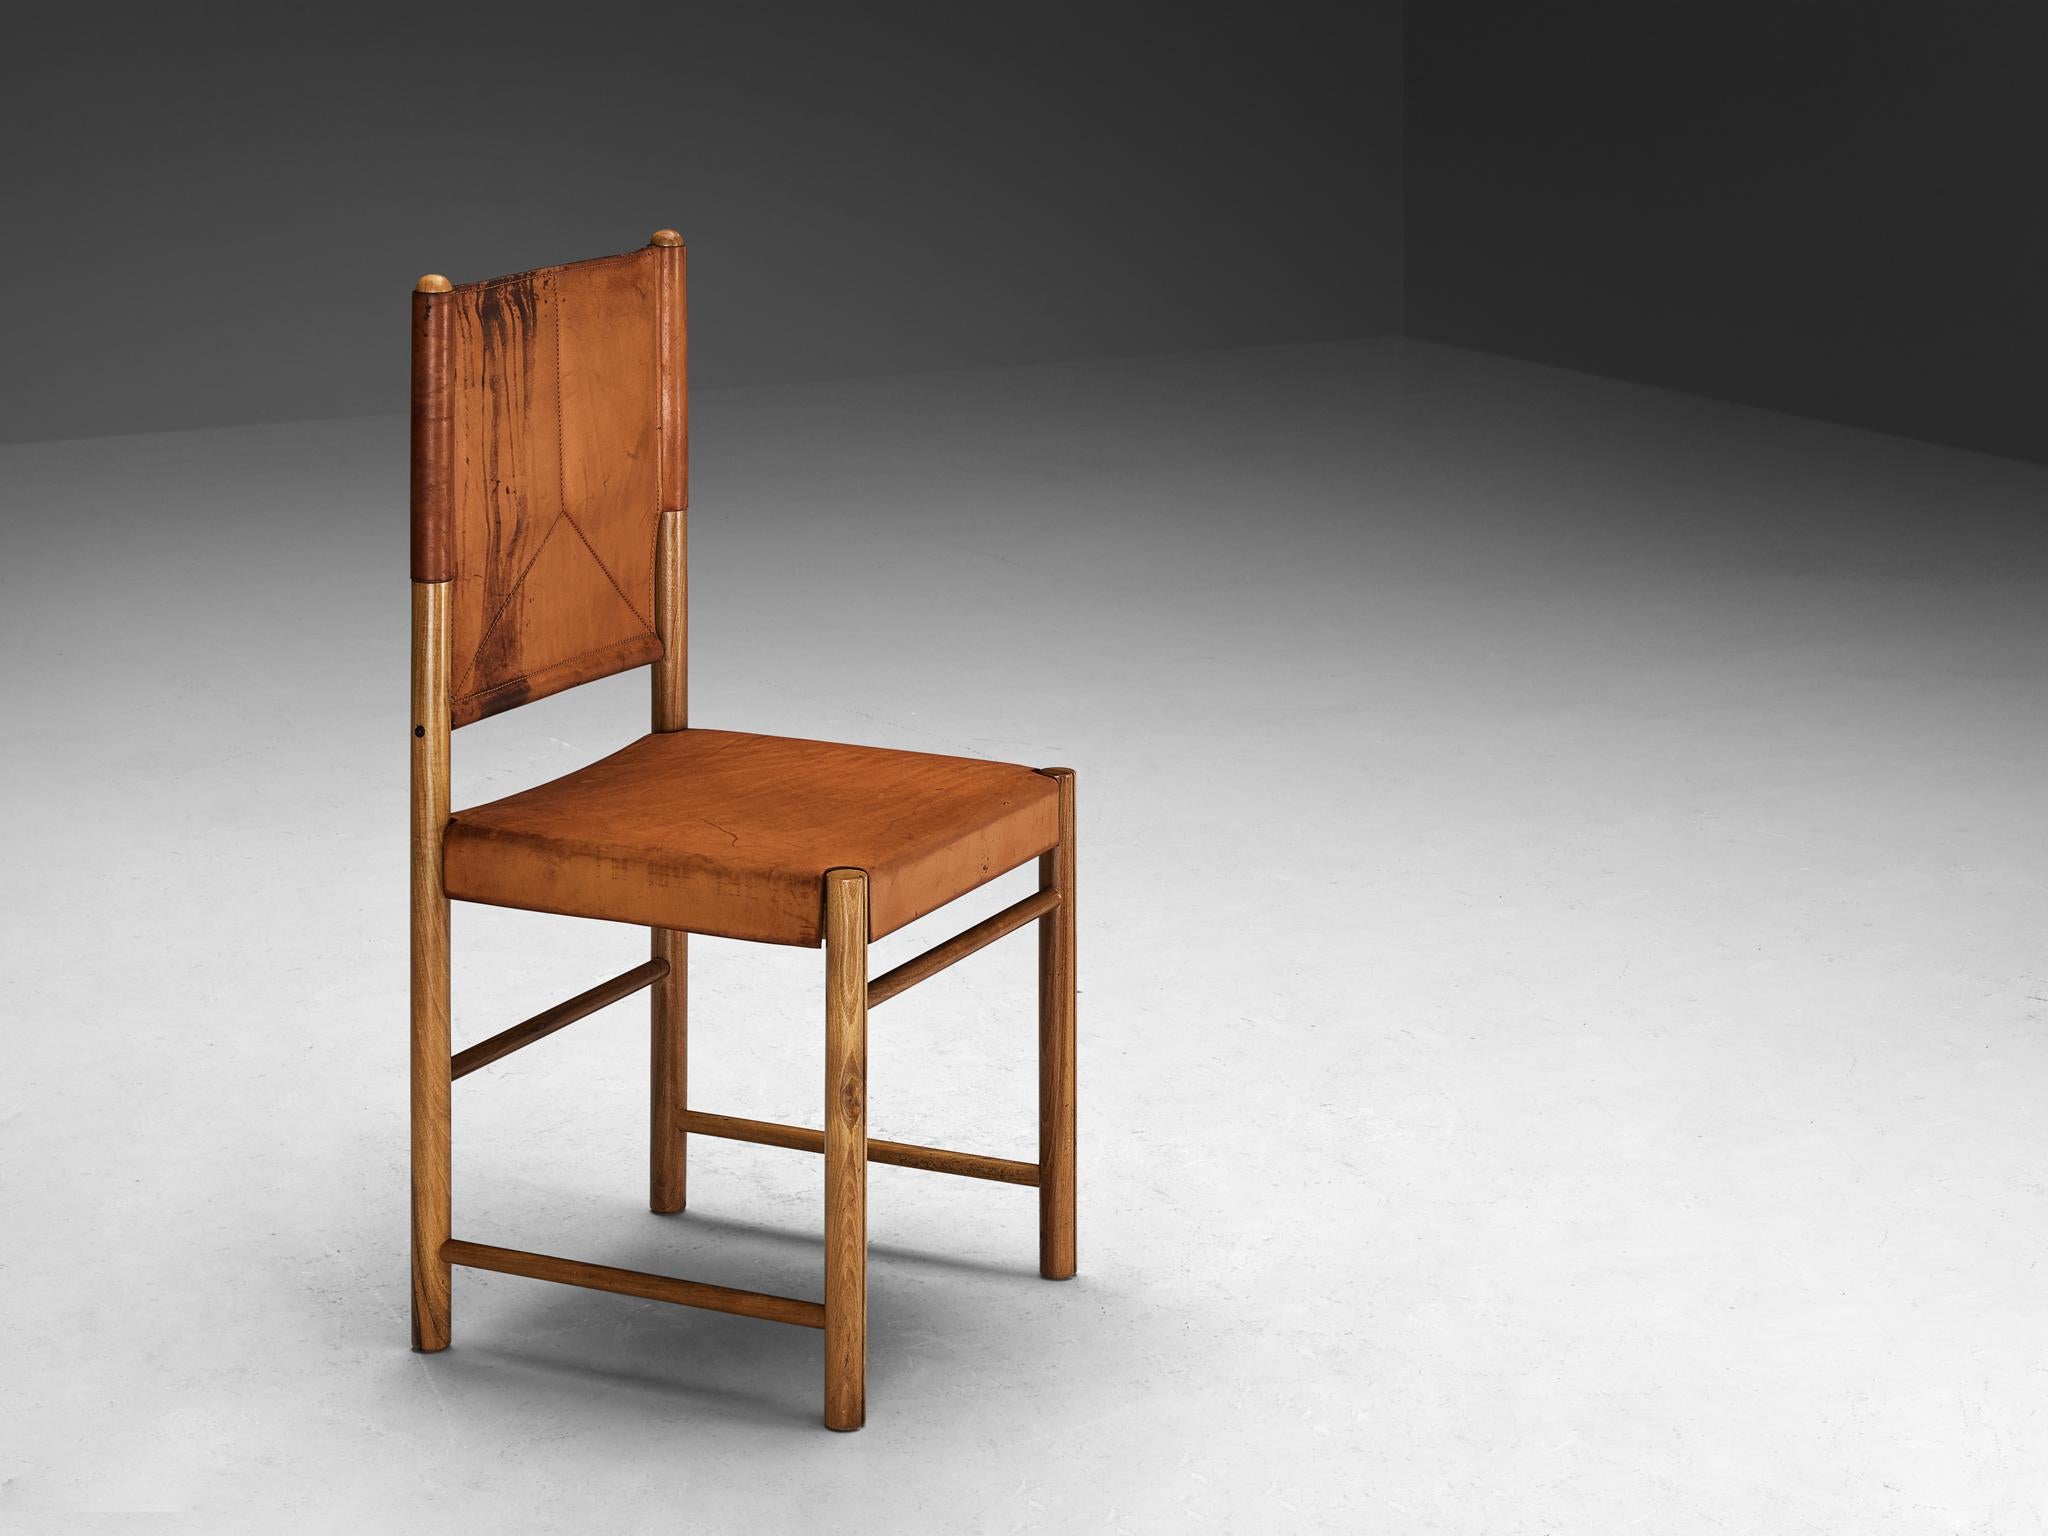 Dining chair, saddle leather, walnut, Italy, 1970s

An elegant and well-proportioned dining chair designed to elevate one's dining area with strength and vitality. Crafted with a wooden frame composed of cylindrical beams securing the leather, this